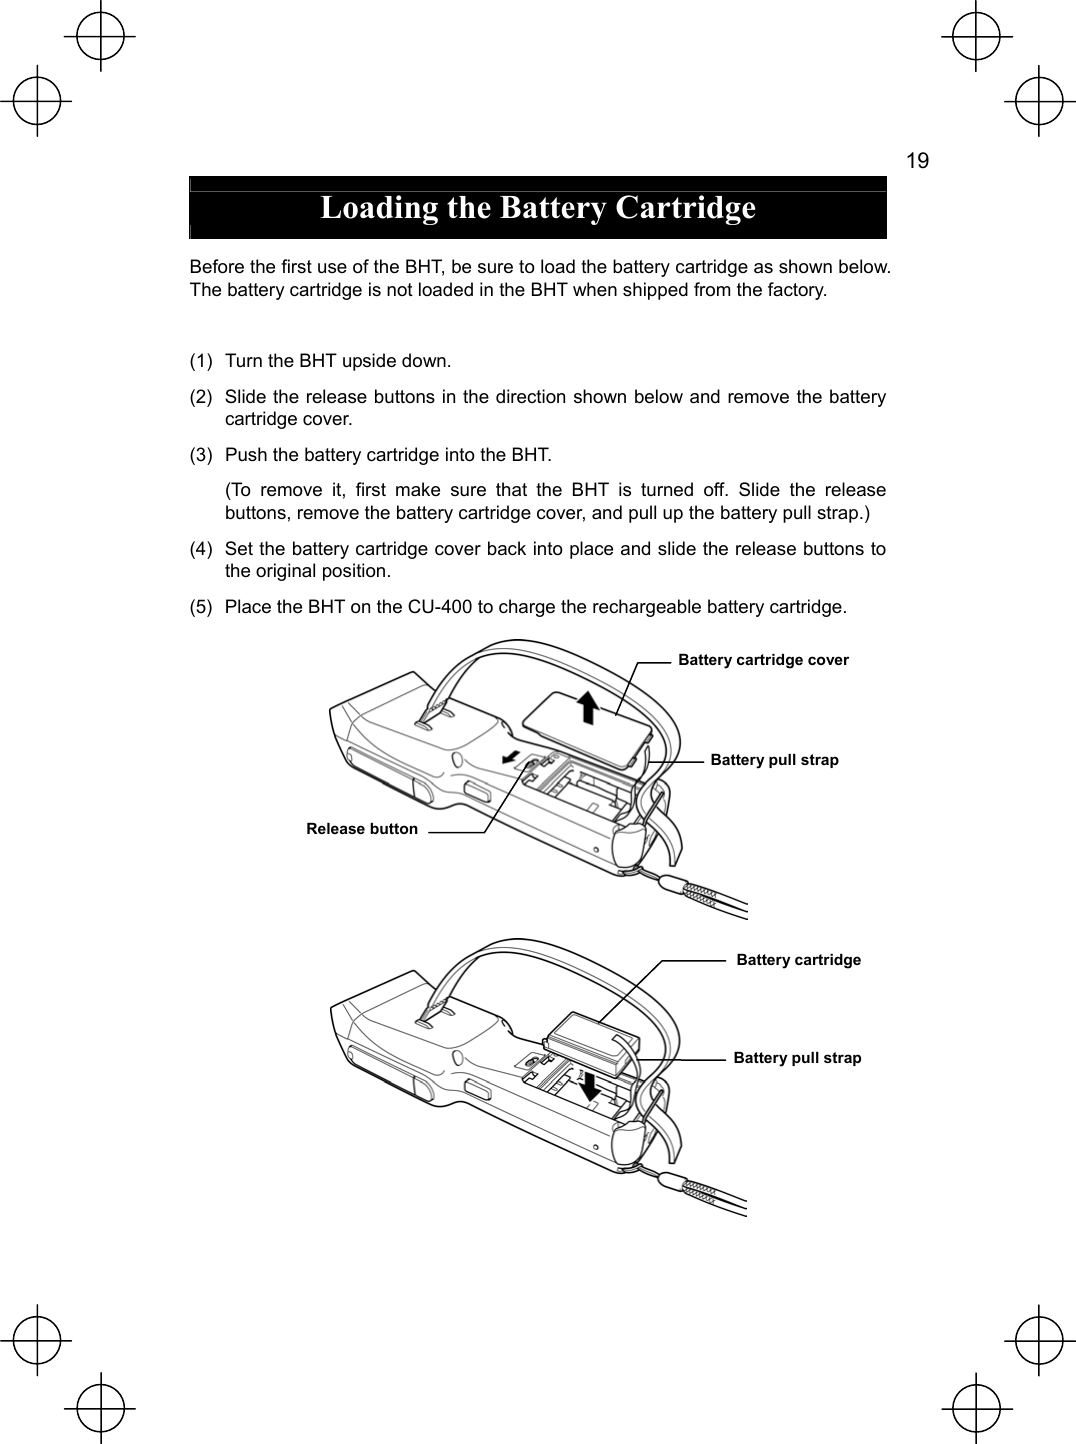   19  Loading the Battery Cartridge  Before the first use of the BHT, be sure to load the battery cartridge as shown below. The battery cartridge is not loaded in the BHT when shipped from the factory.  (1)  Turn the BHT upside down. (2)  Slide the release buttons in the direction shown below and remove the battery cartridge cover. (3)  Push the battery cartridge into the BHT.   (To remove it, first make sure that the BHT is turned off. Slide the release buttons, remove the battery cartridge cover, and pull up the battery pull strap.) (4)  Set the battery cartridge cover back into place and slide the release buttons to the original position. (5)  Place the BHT on the CU-400 to charge the rechargeable battery cartridge.   Battery pull strap Battery cartridge Release button Battery cartridge cover Battery pull strap 